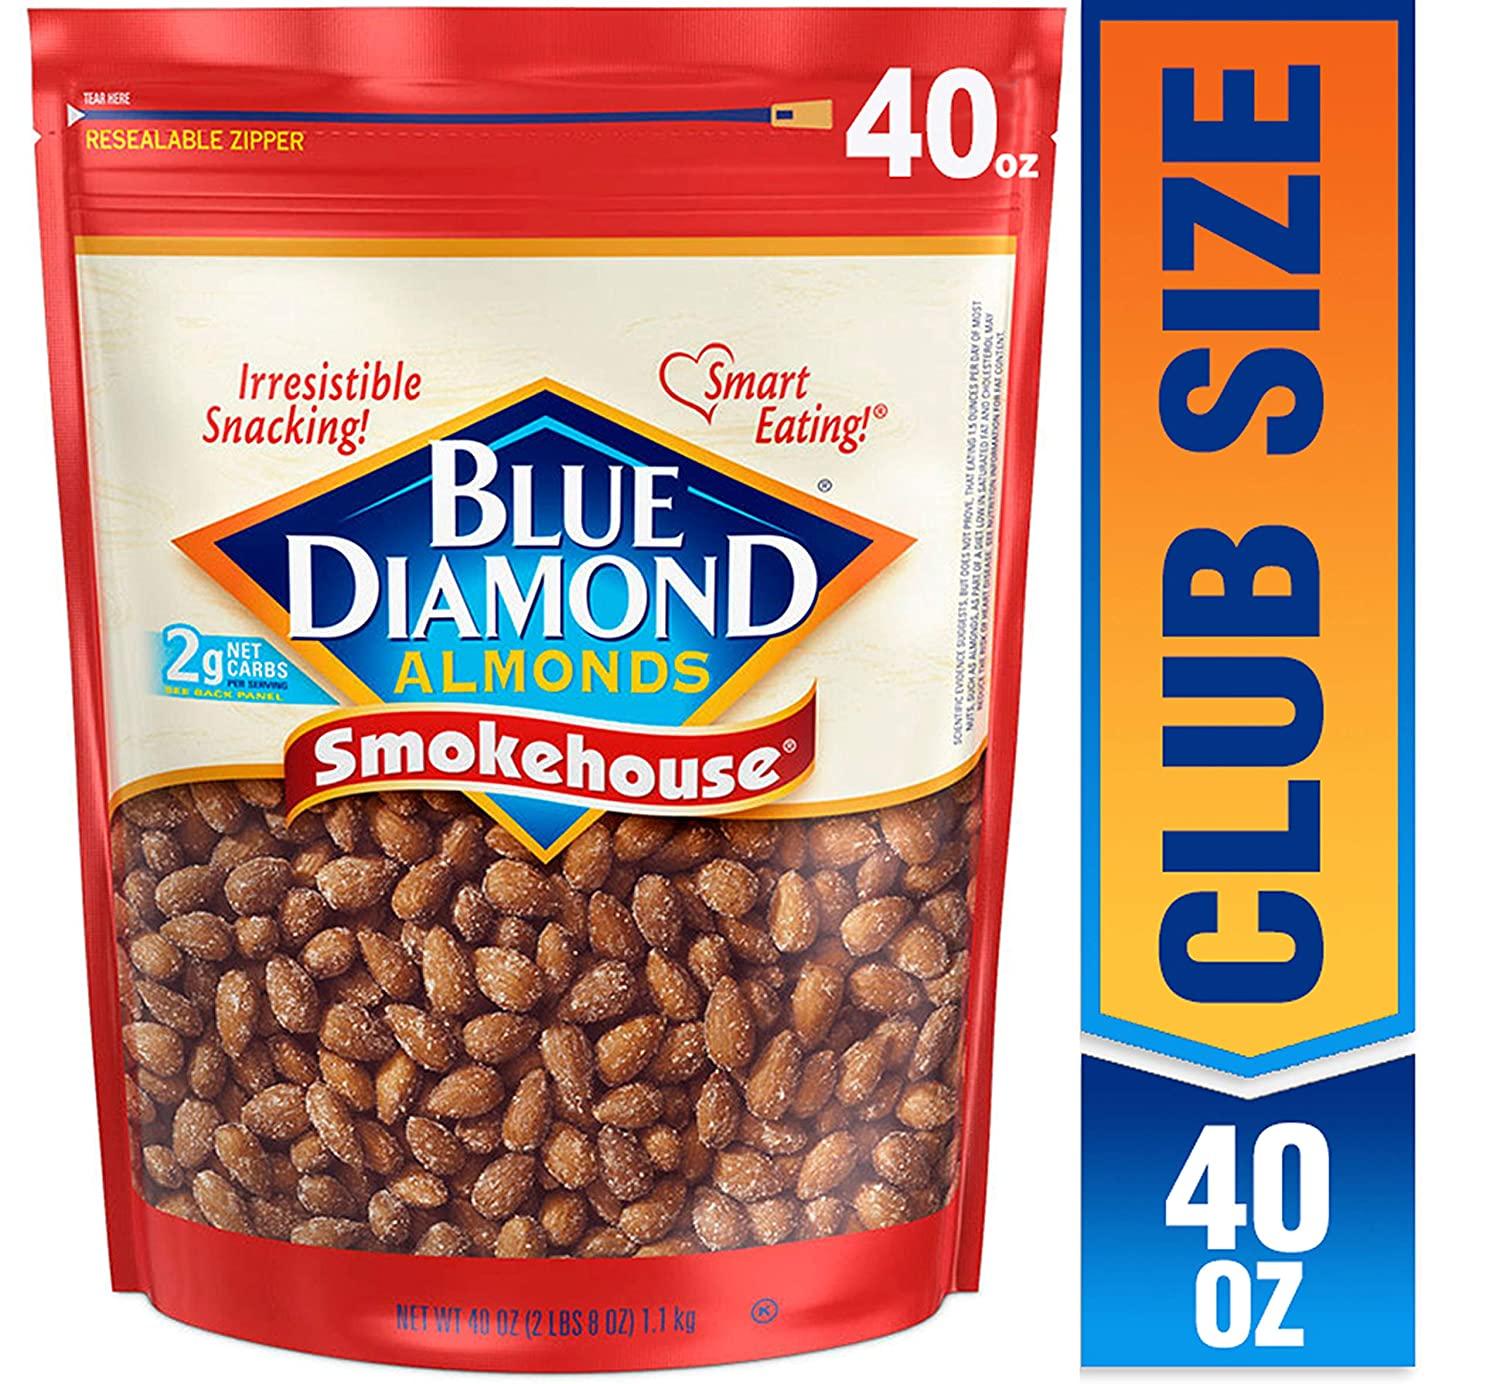 Blue Diamond Almonds Smokehouse Flavored Snack Nuts for $9.03 Shipped